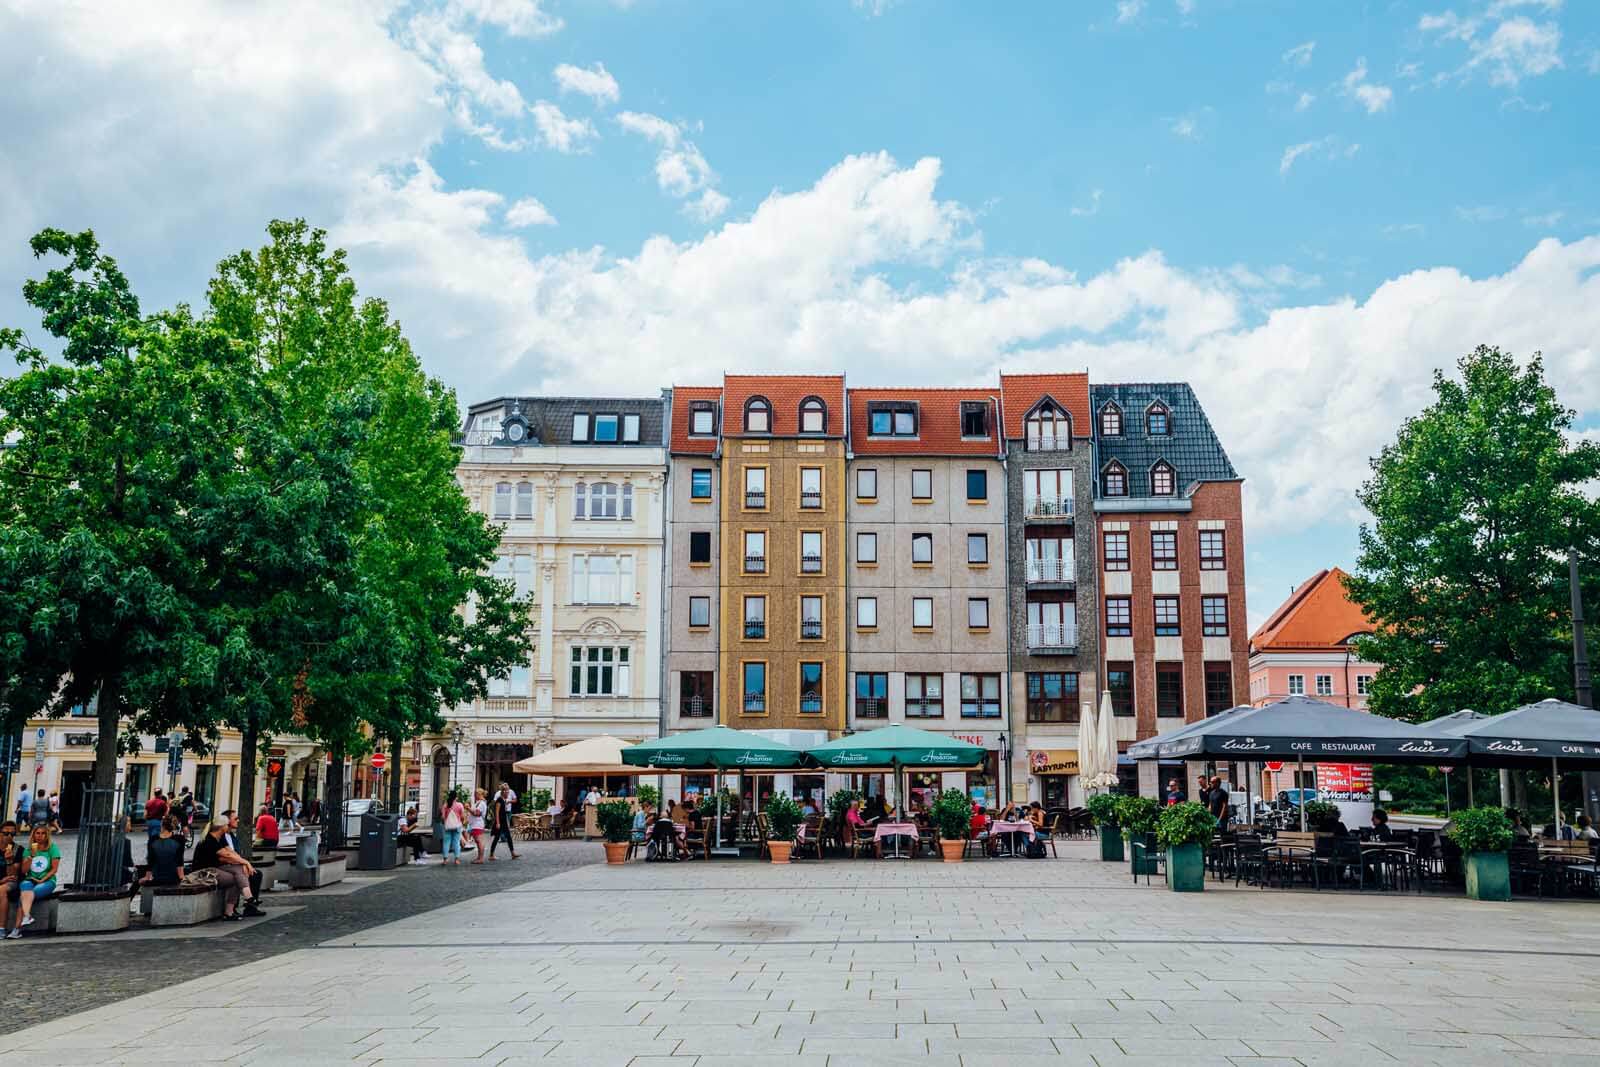 the different styles of architecture in Altmarkt in Cottbus Germany